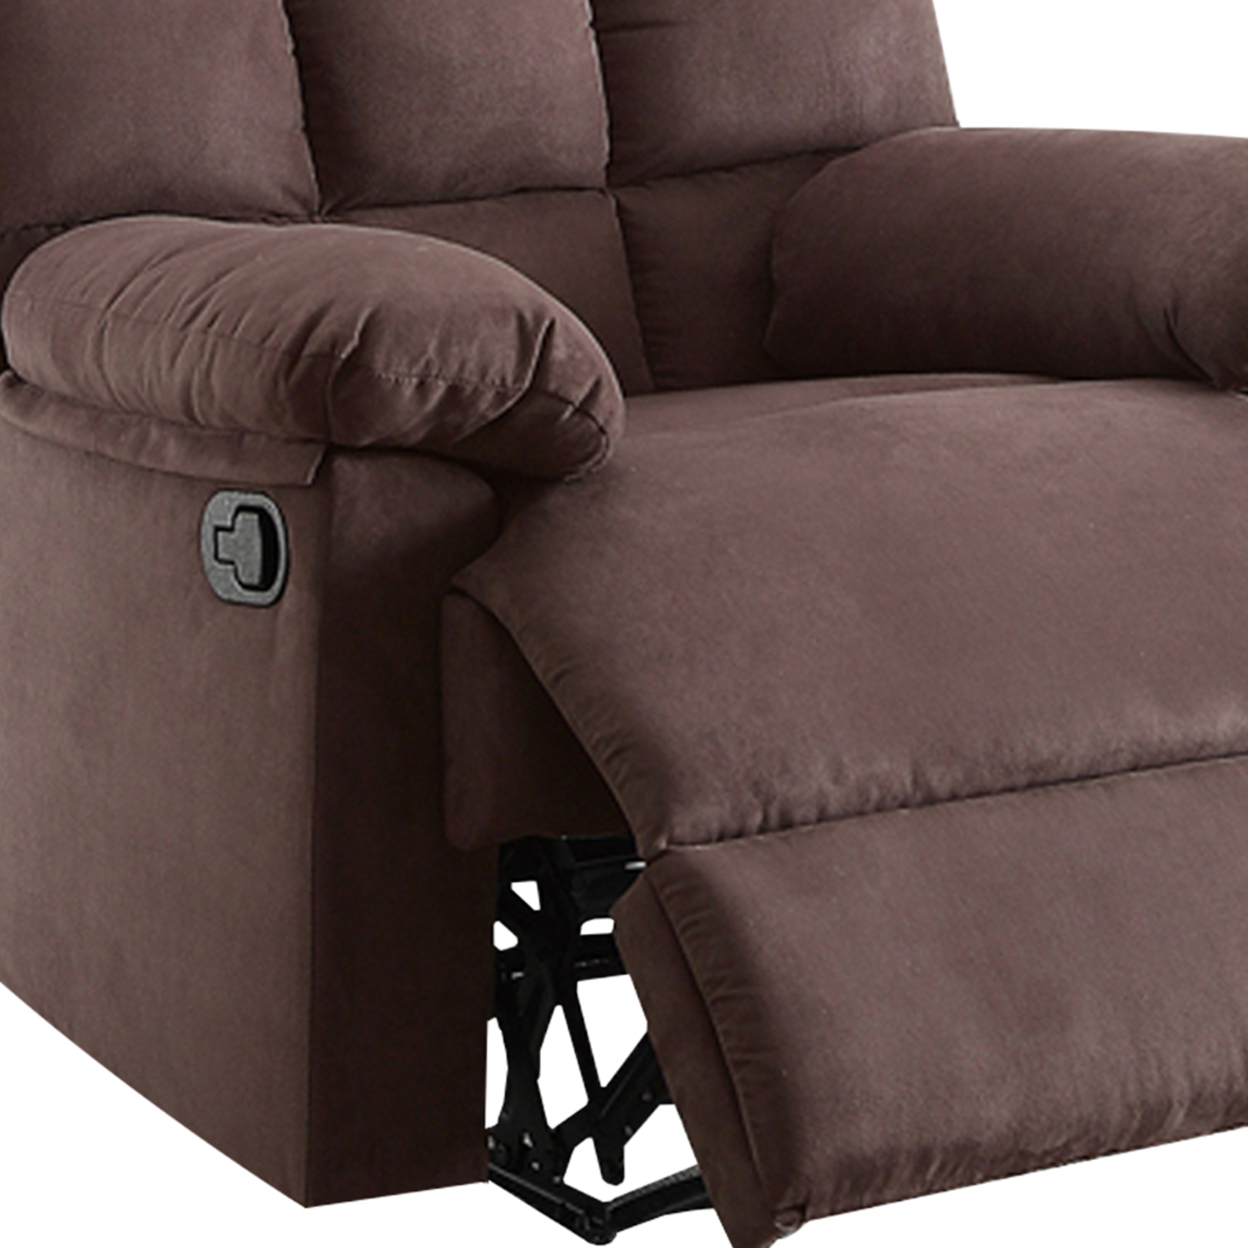 Plush Cushioned Recliner With Tufted Back And Roll Arms In Brown- Saltoro Sherpi